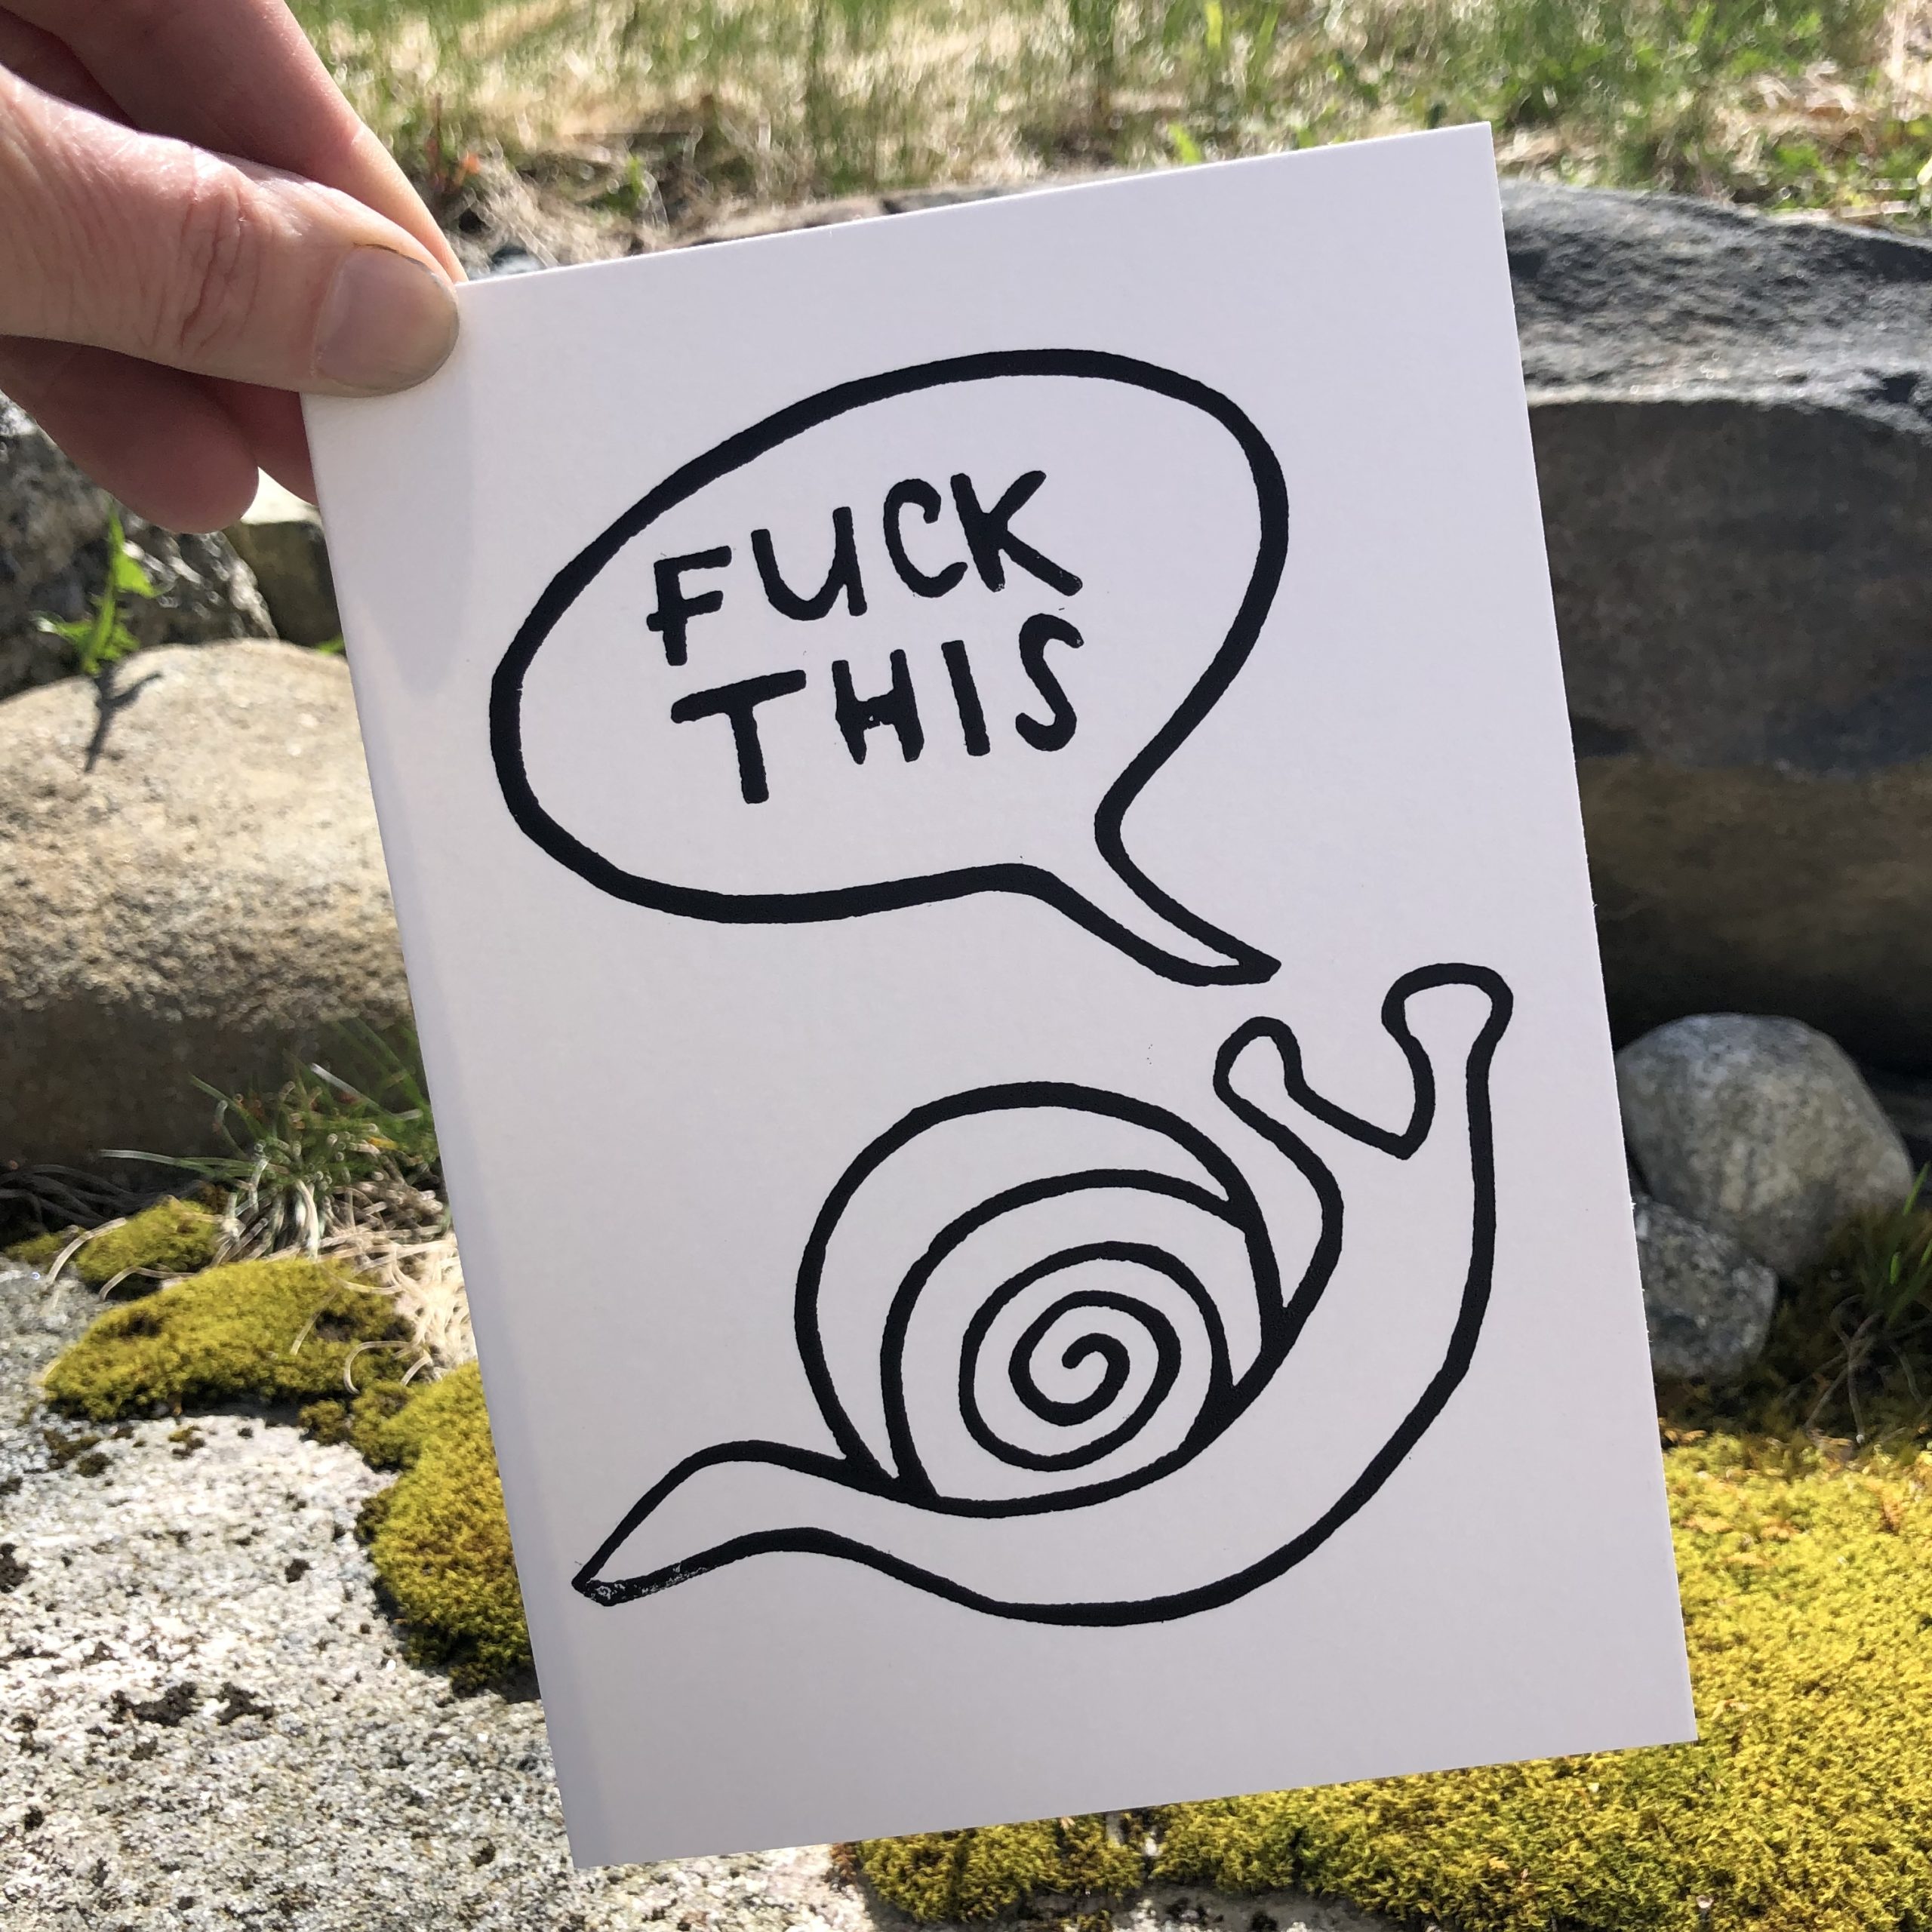 A white card with a black outline of a snail in blank ink. A speech bubble above the snail says “fuck this” in all caps. The style is low-fi and minimalist. The card is held by the upper left corner in a woman’s hand, outdoors with moss-covered boulders behind it.